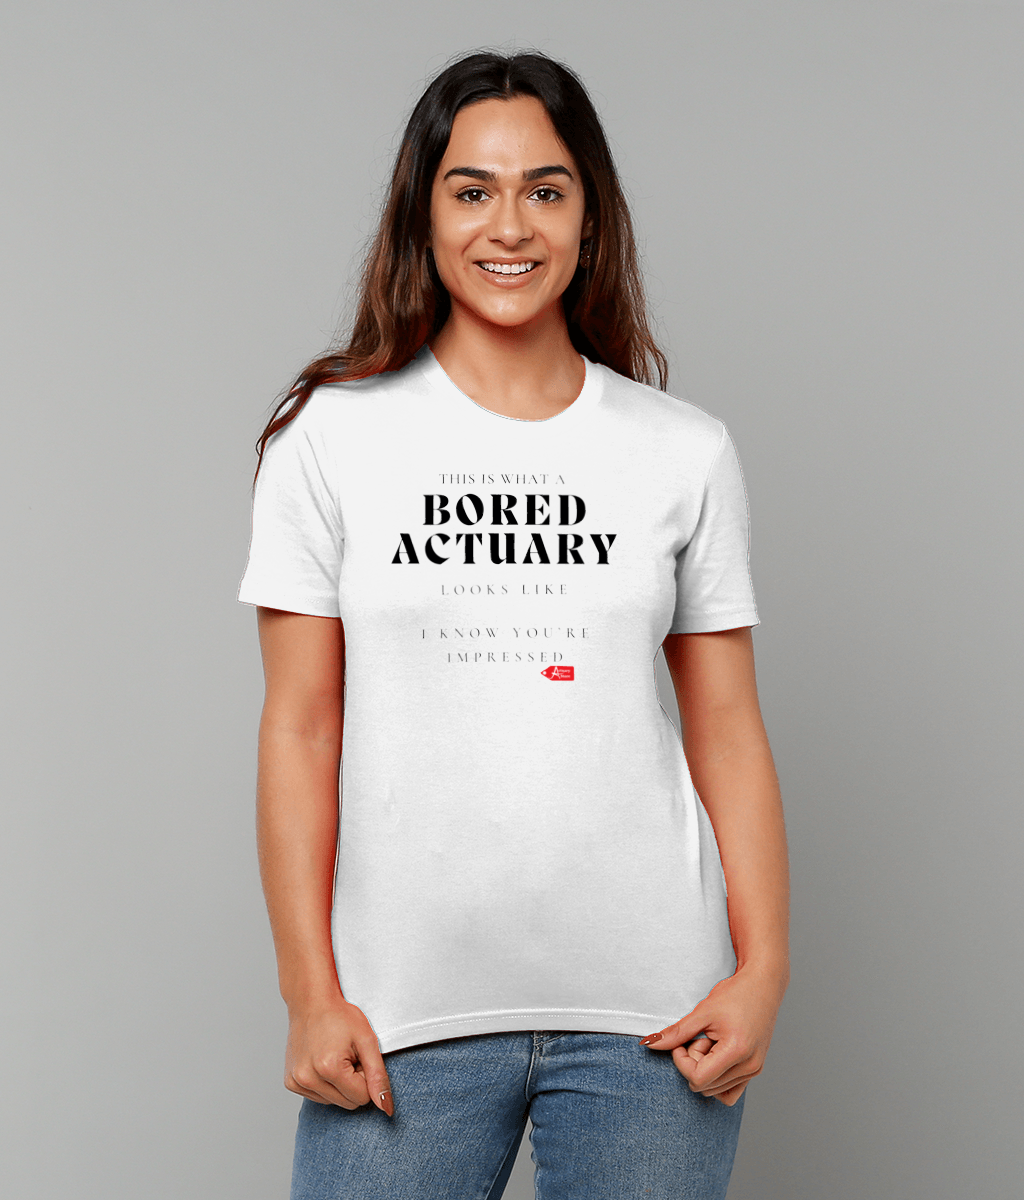 This is What A Bored Actuary Looks Like. I know You're Impressed T-Shirt